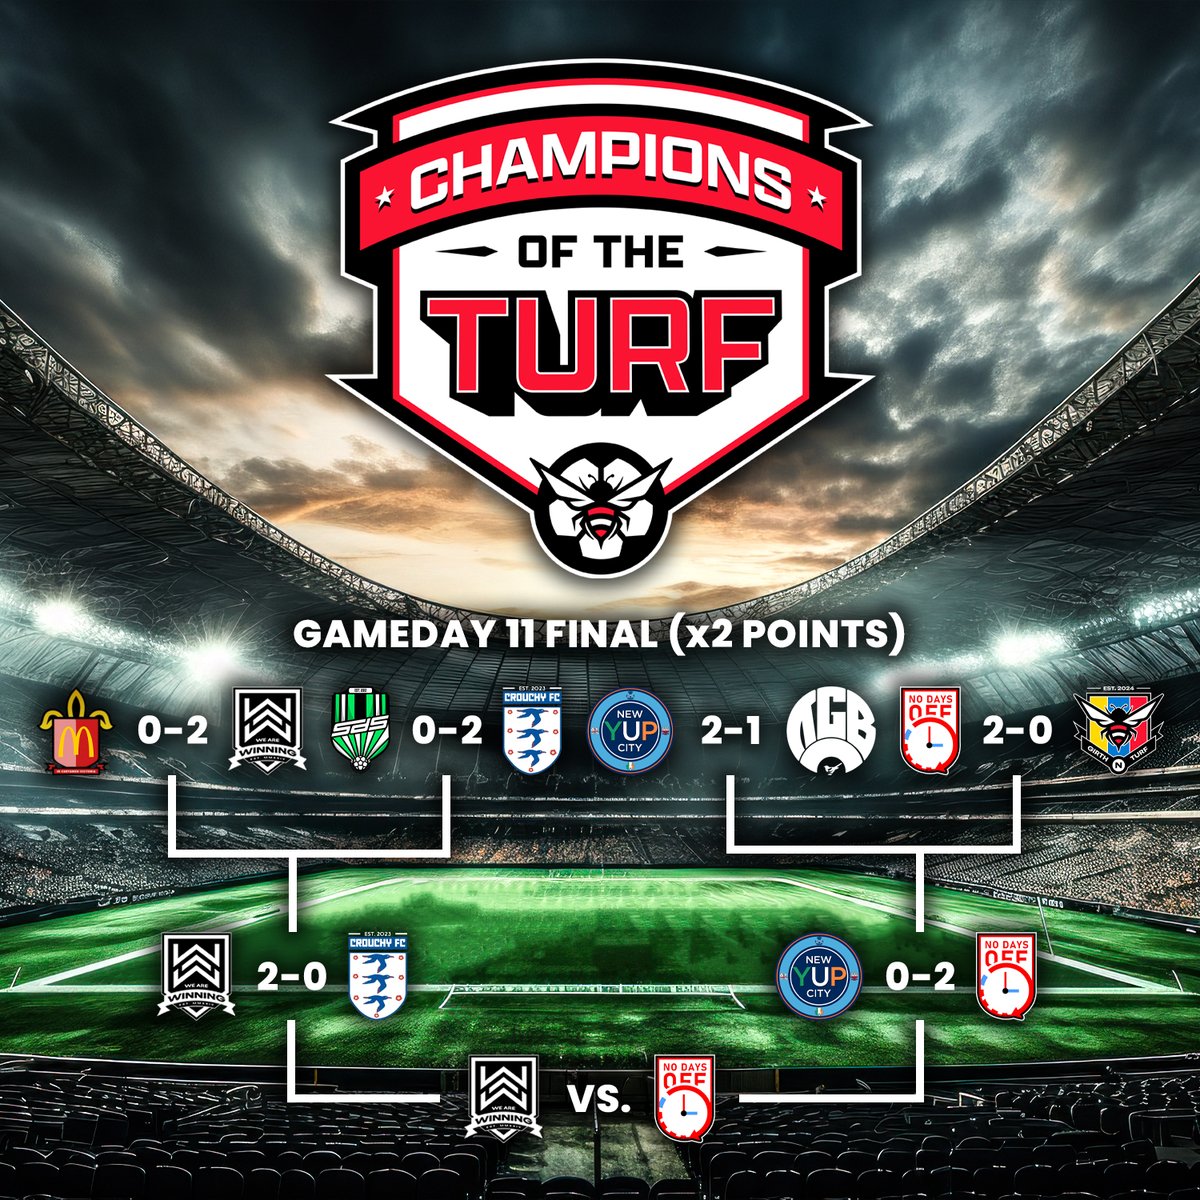 🚨 CHAMPIONS OF THE TURF 🚨

Have @NewYUPCityFC bottled it on the final hurdle❓ If @NoDaysOffFC win the final, the league phase is theirs❗

@WAW_FC vs. @NoDaysOffFC 

#GirthNTurf